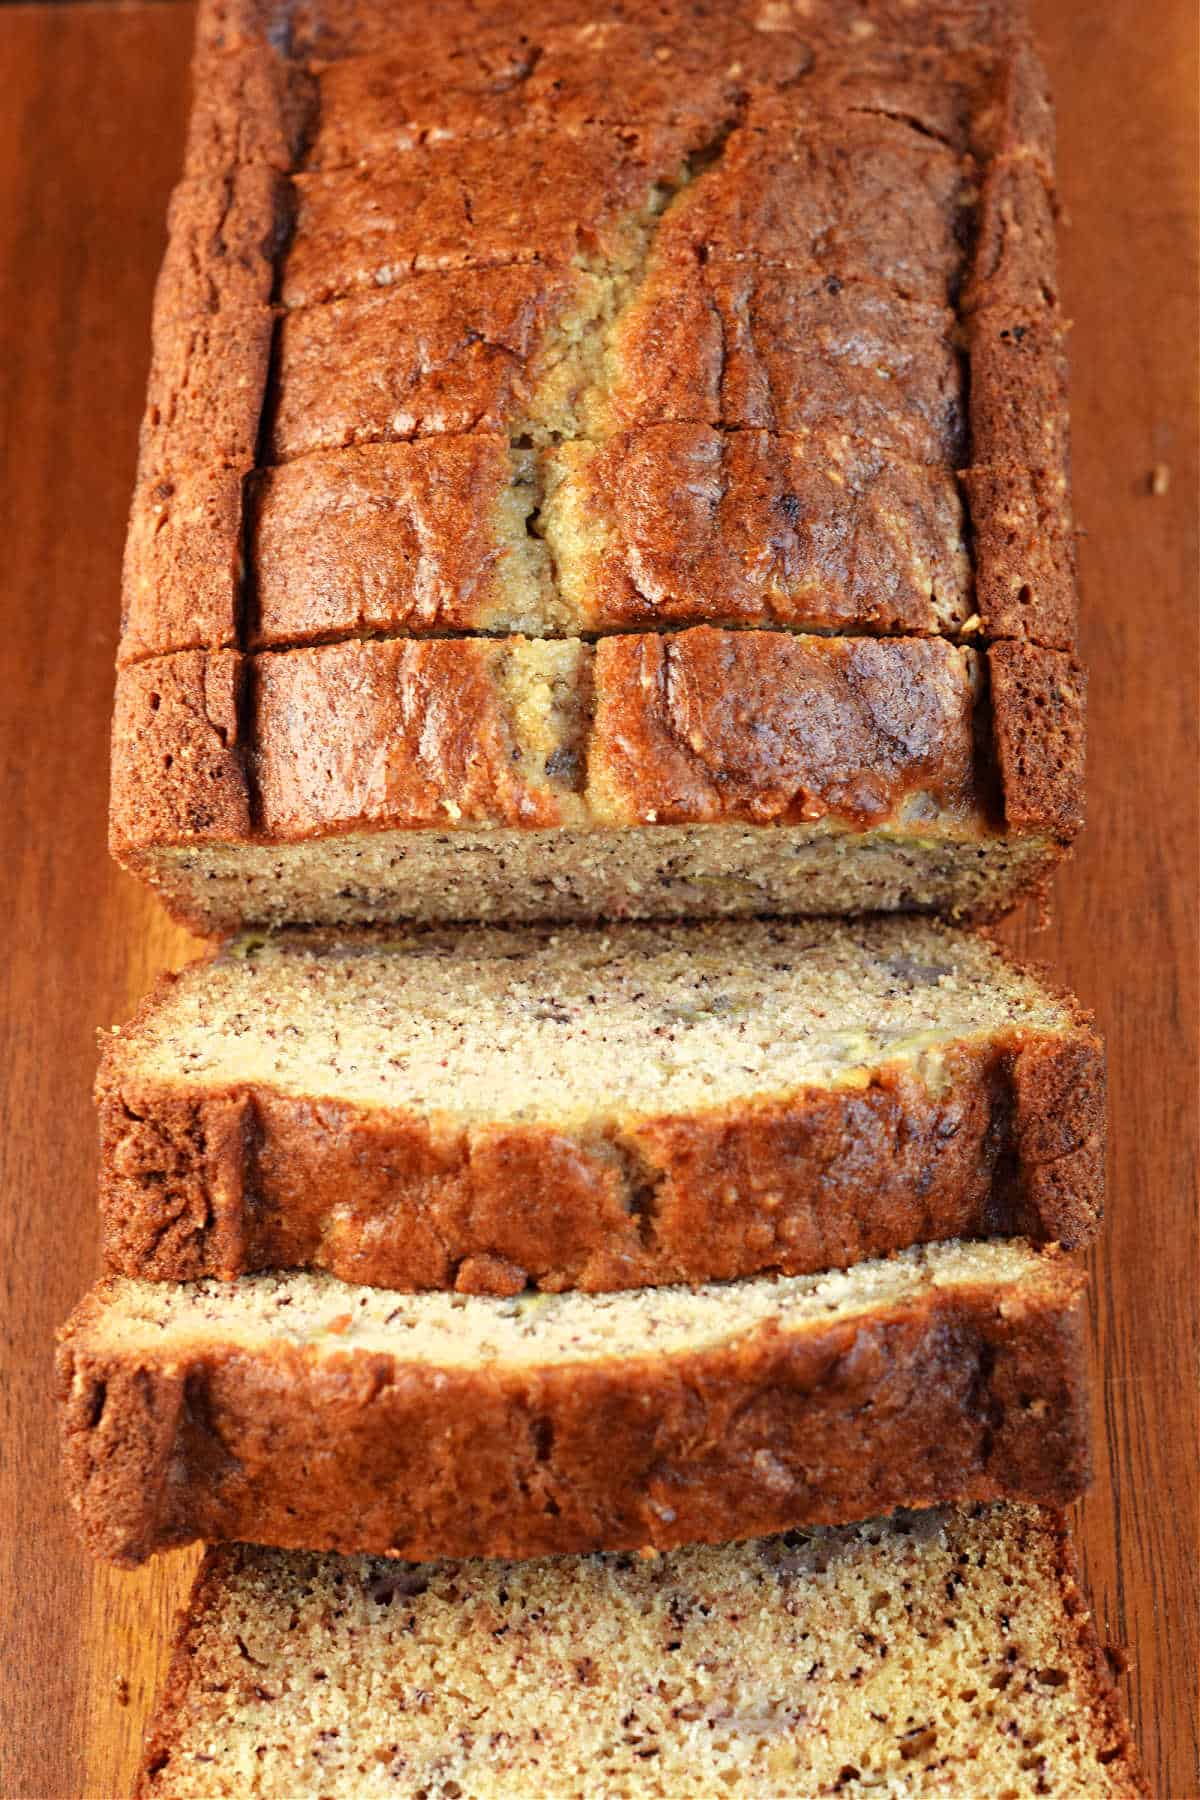 Loaf of banana bread on wooden cutting board with thick slices cut.